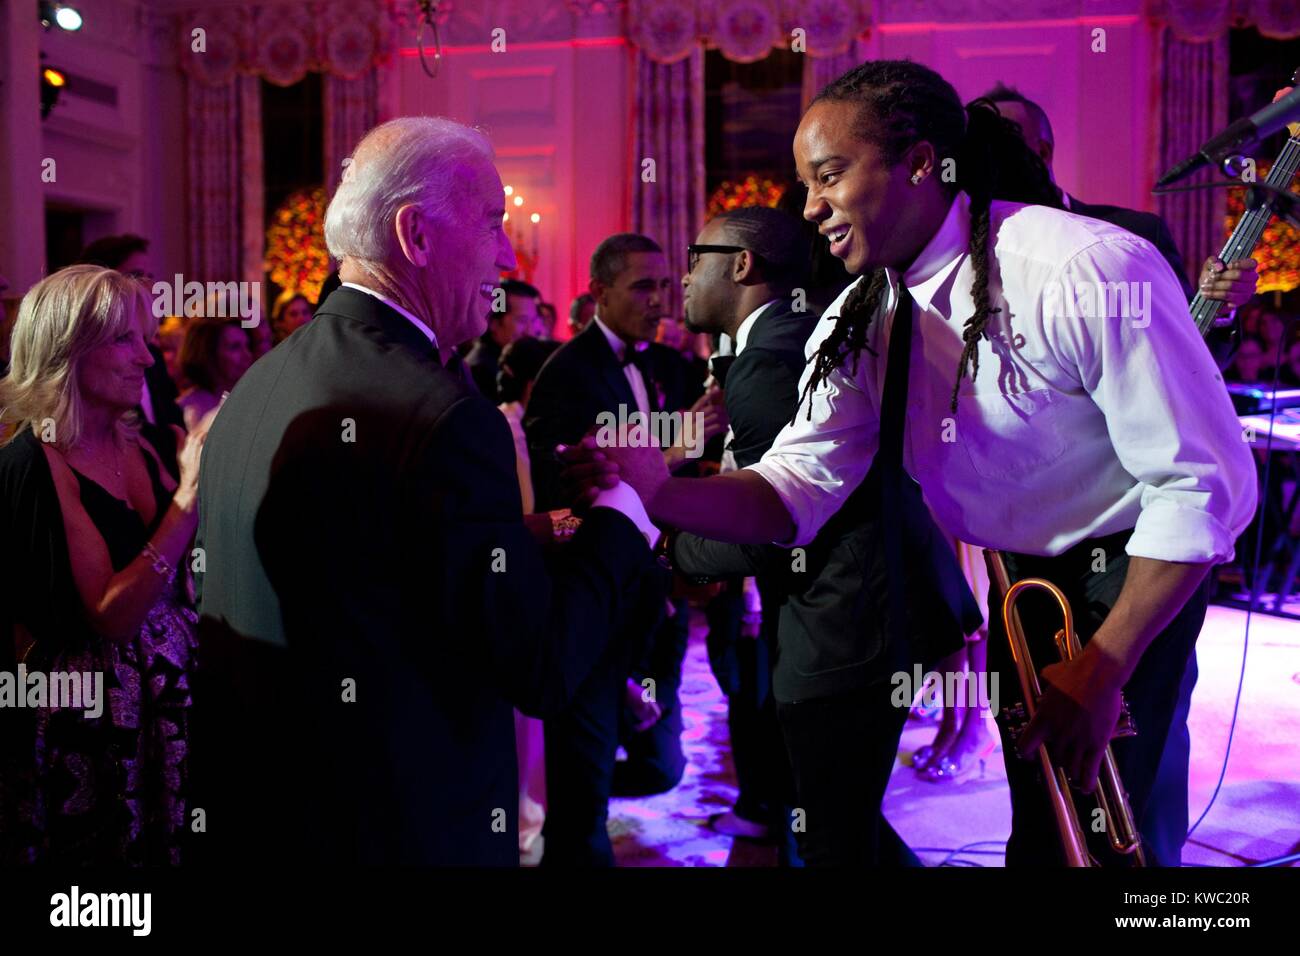 Vice President Joe Biden greets Lance Powlis, a trumpet player in Janelle Monae's band. The group performed in the State Dining Room of the White House, Oct. 13, 2011. (BSLOC 2015 3 91) Stock Photo